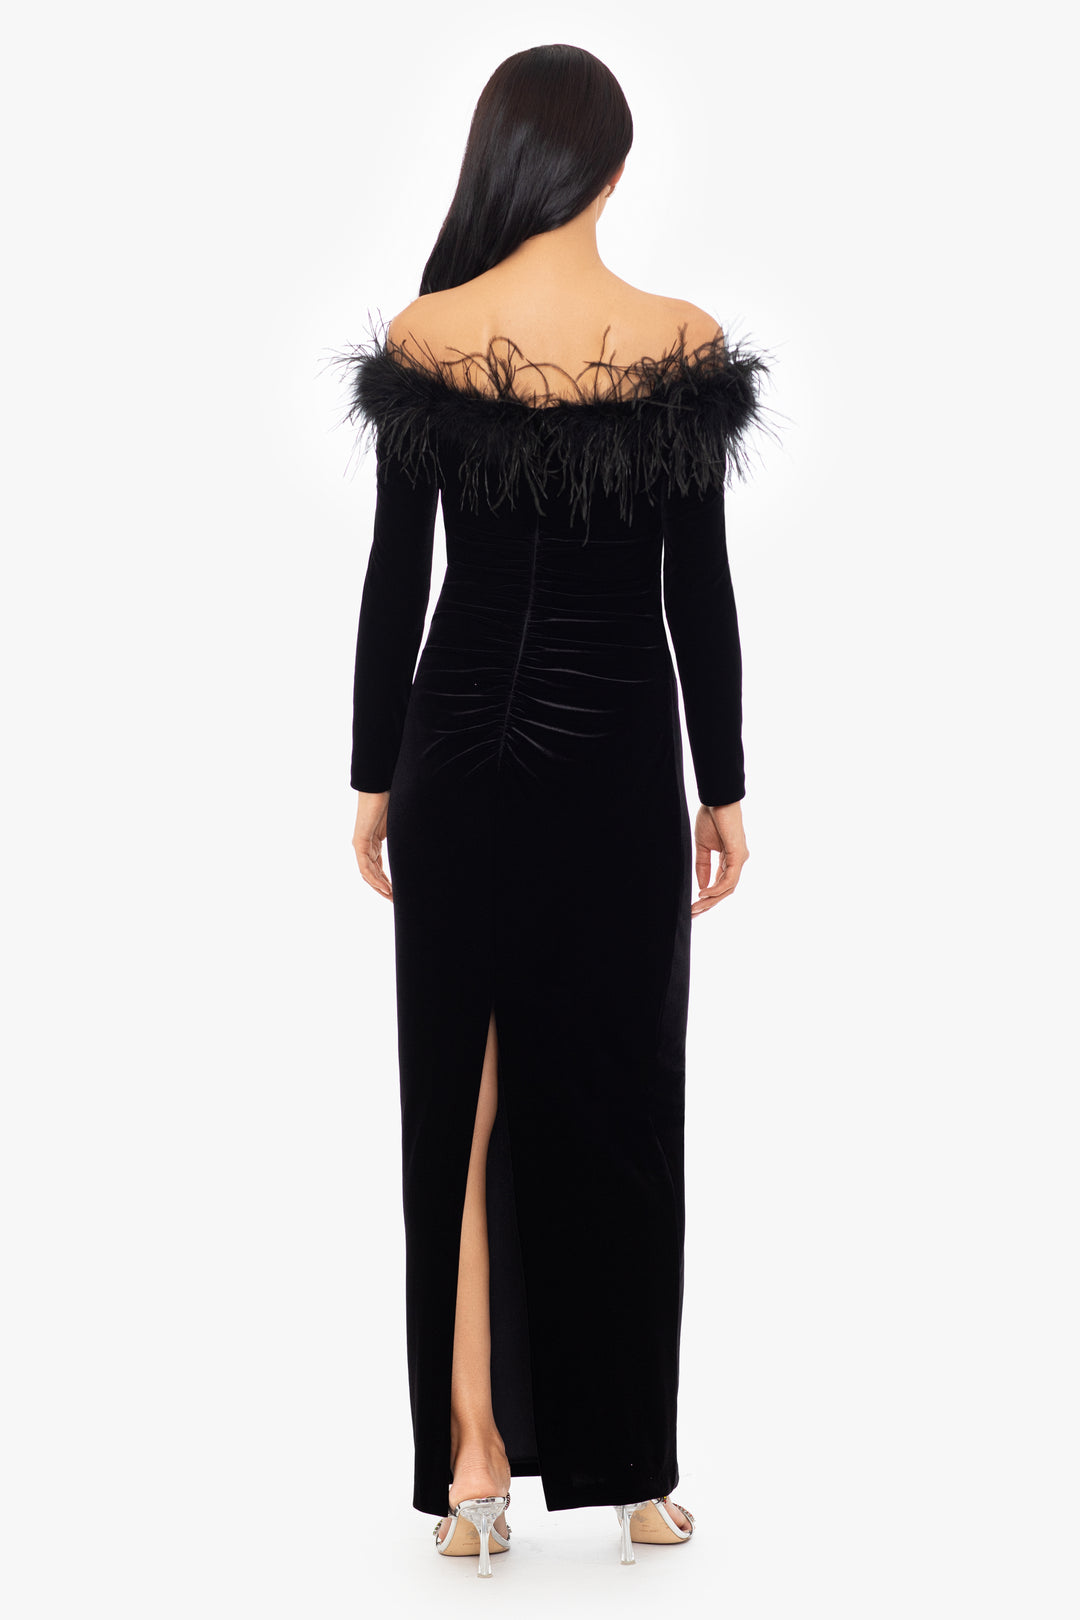 "Esther" Off the Shoulder Long Sleeve Velvet Dress With Feathers